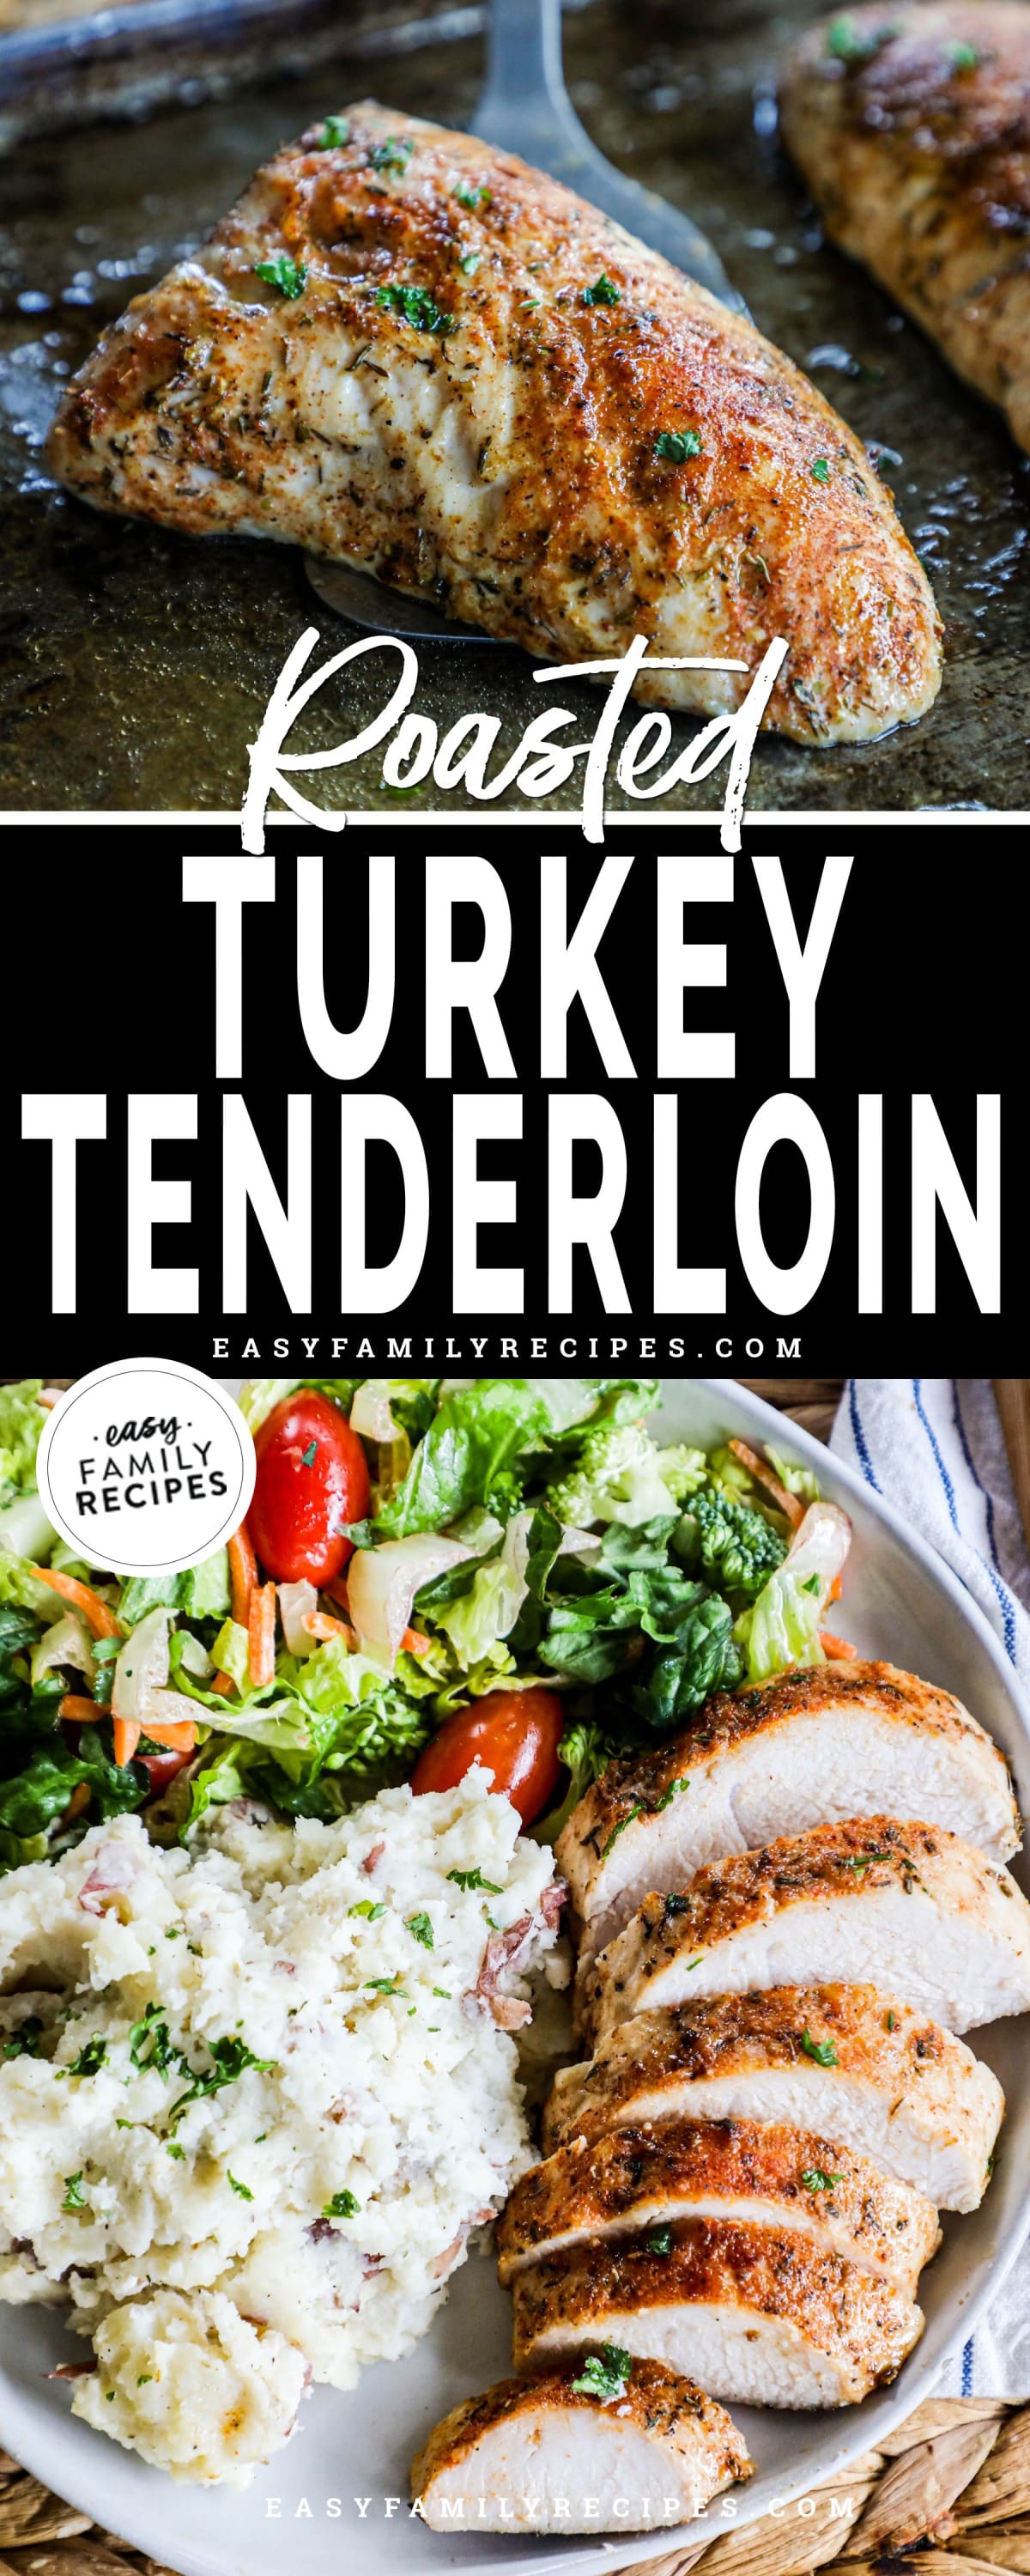 First image is oven a delicious, crispy and seasoned turkey tenderloin. The second picture is a plated, sliced turkey breast tenderloin. It is alongside mashed potatoes and a green salad.